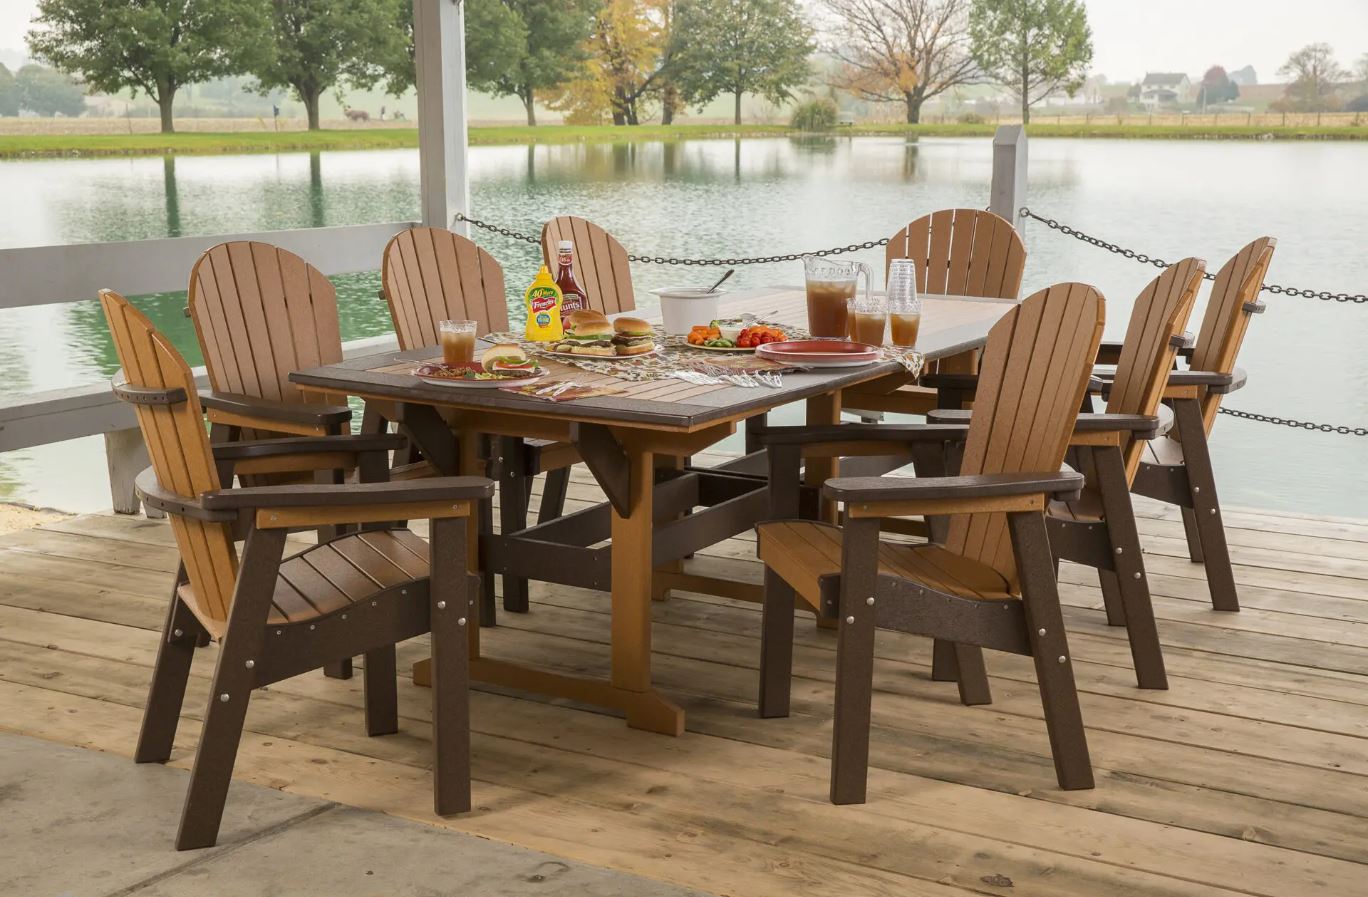 Our "Great bay outdoor dining set".